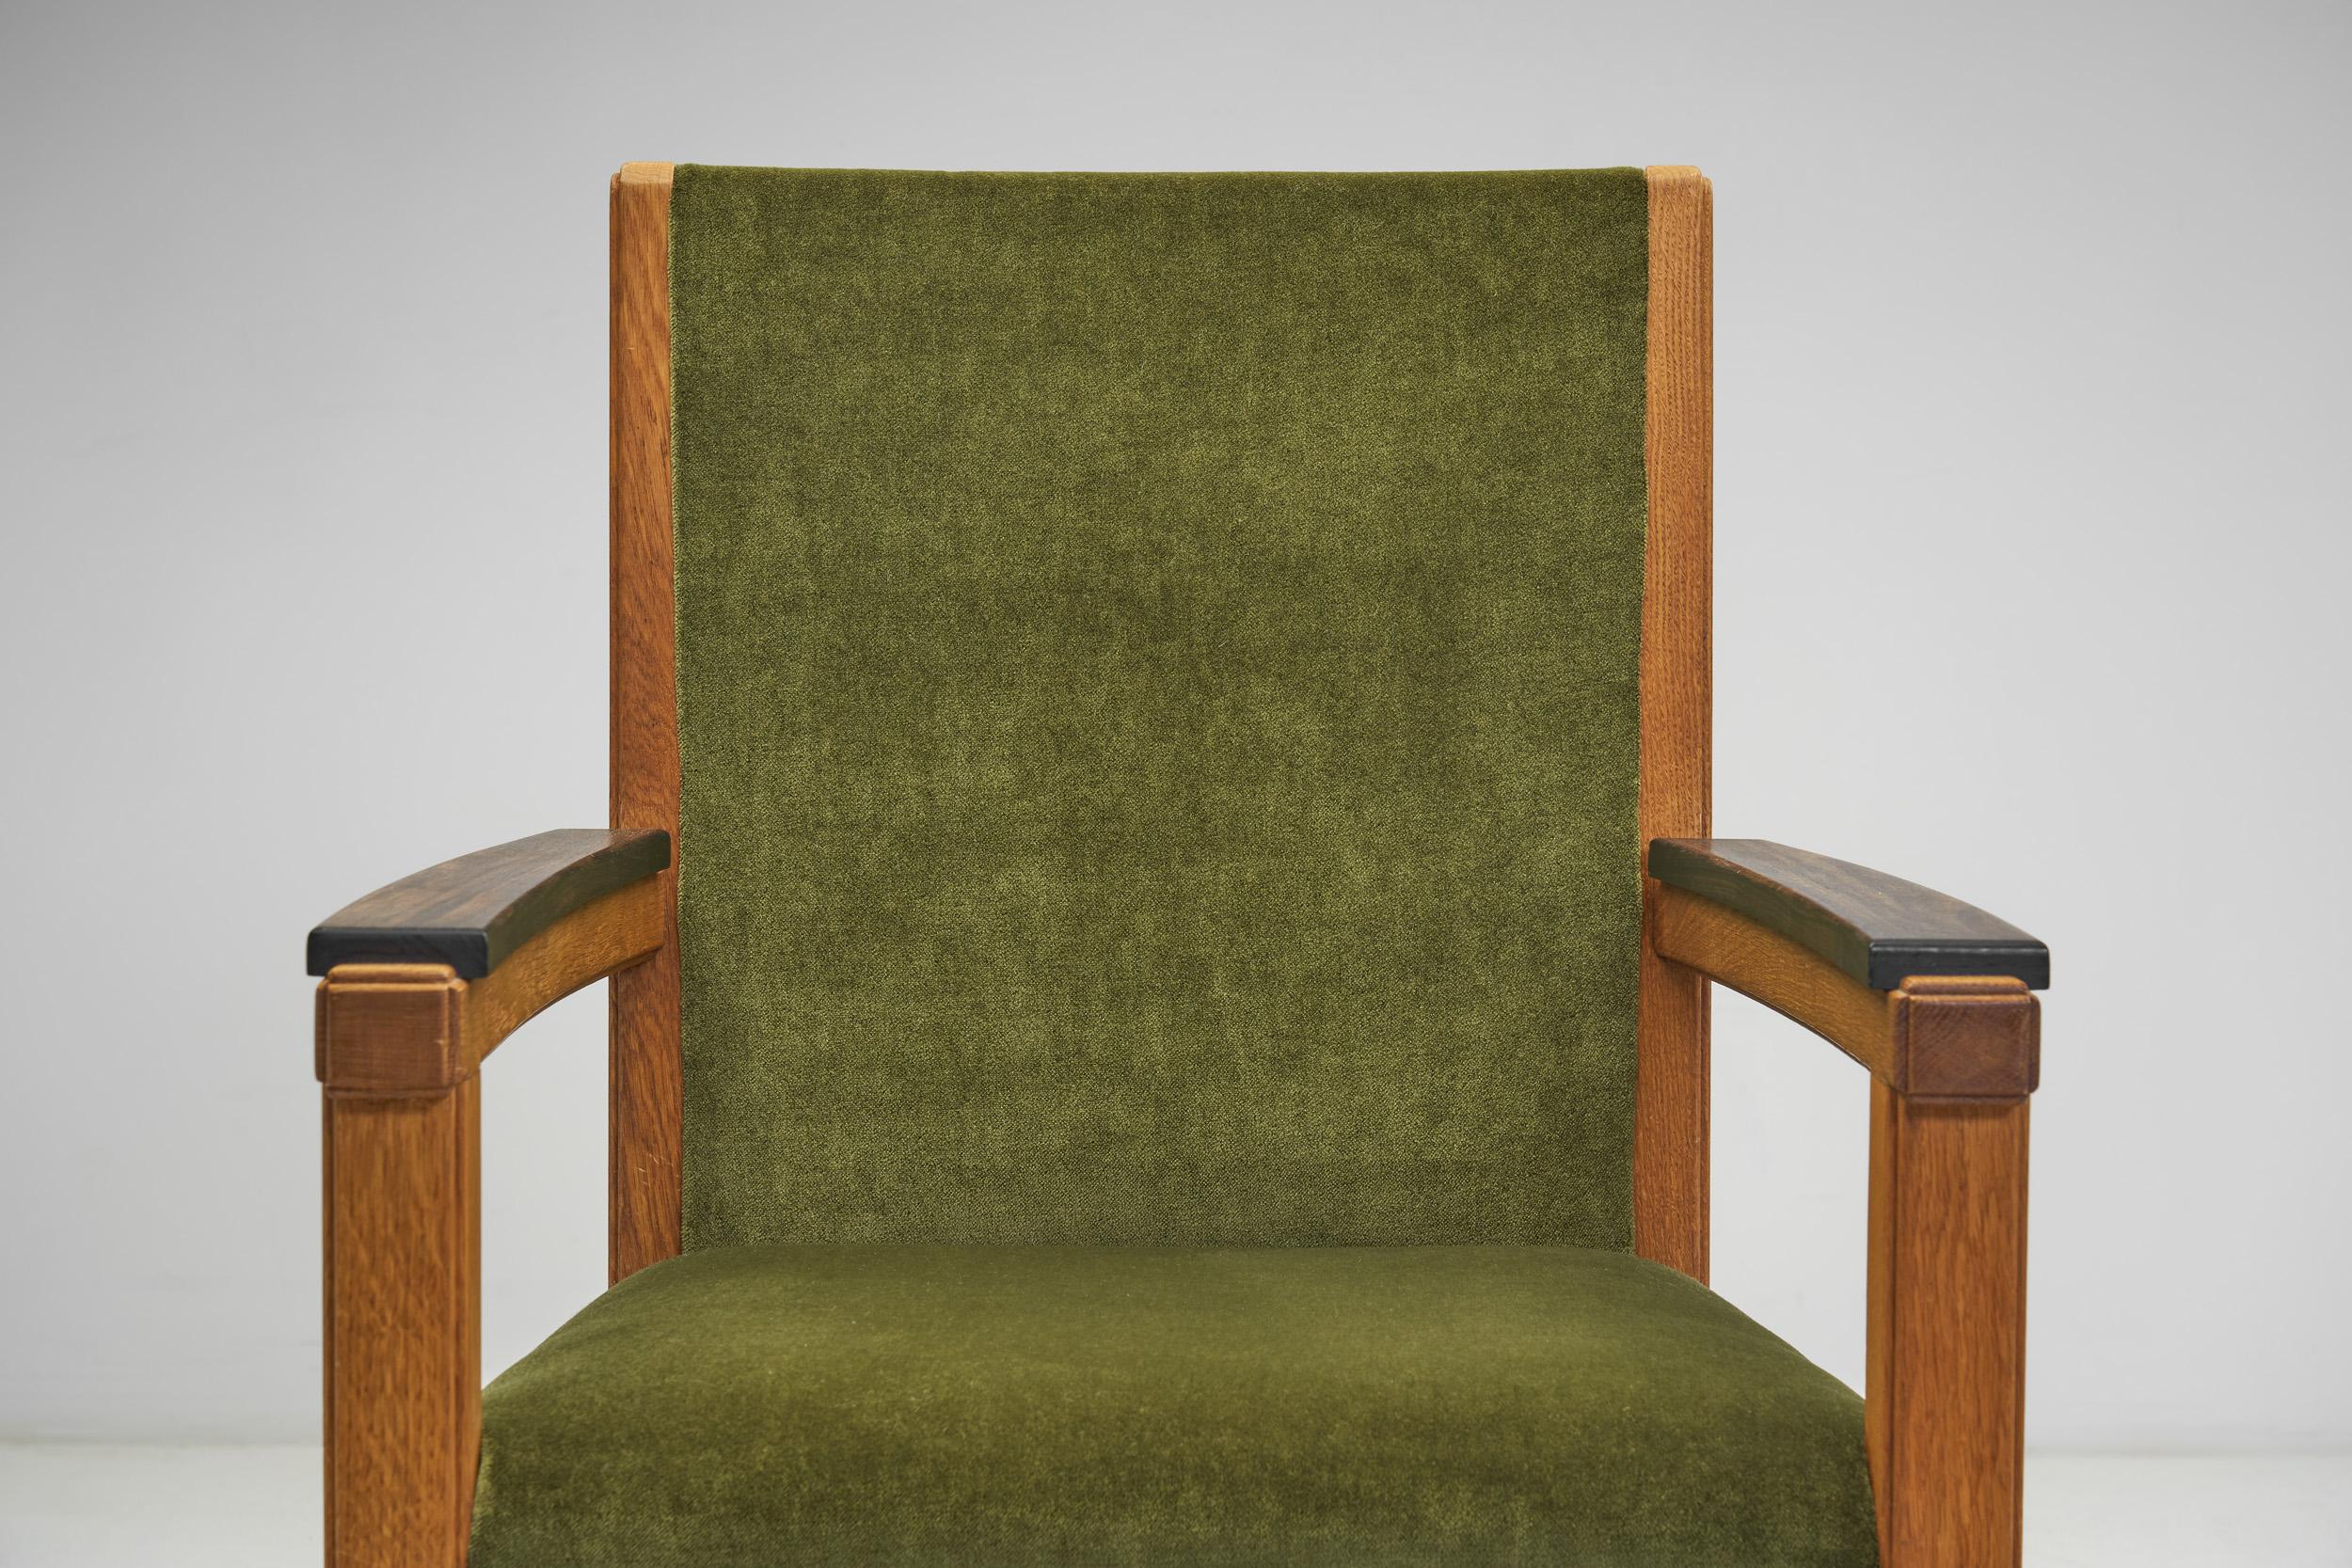 Upholstered Amsterdamse School Chairs, The Netherlands Early 20th Century For Sale 1